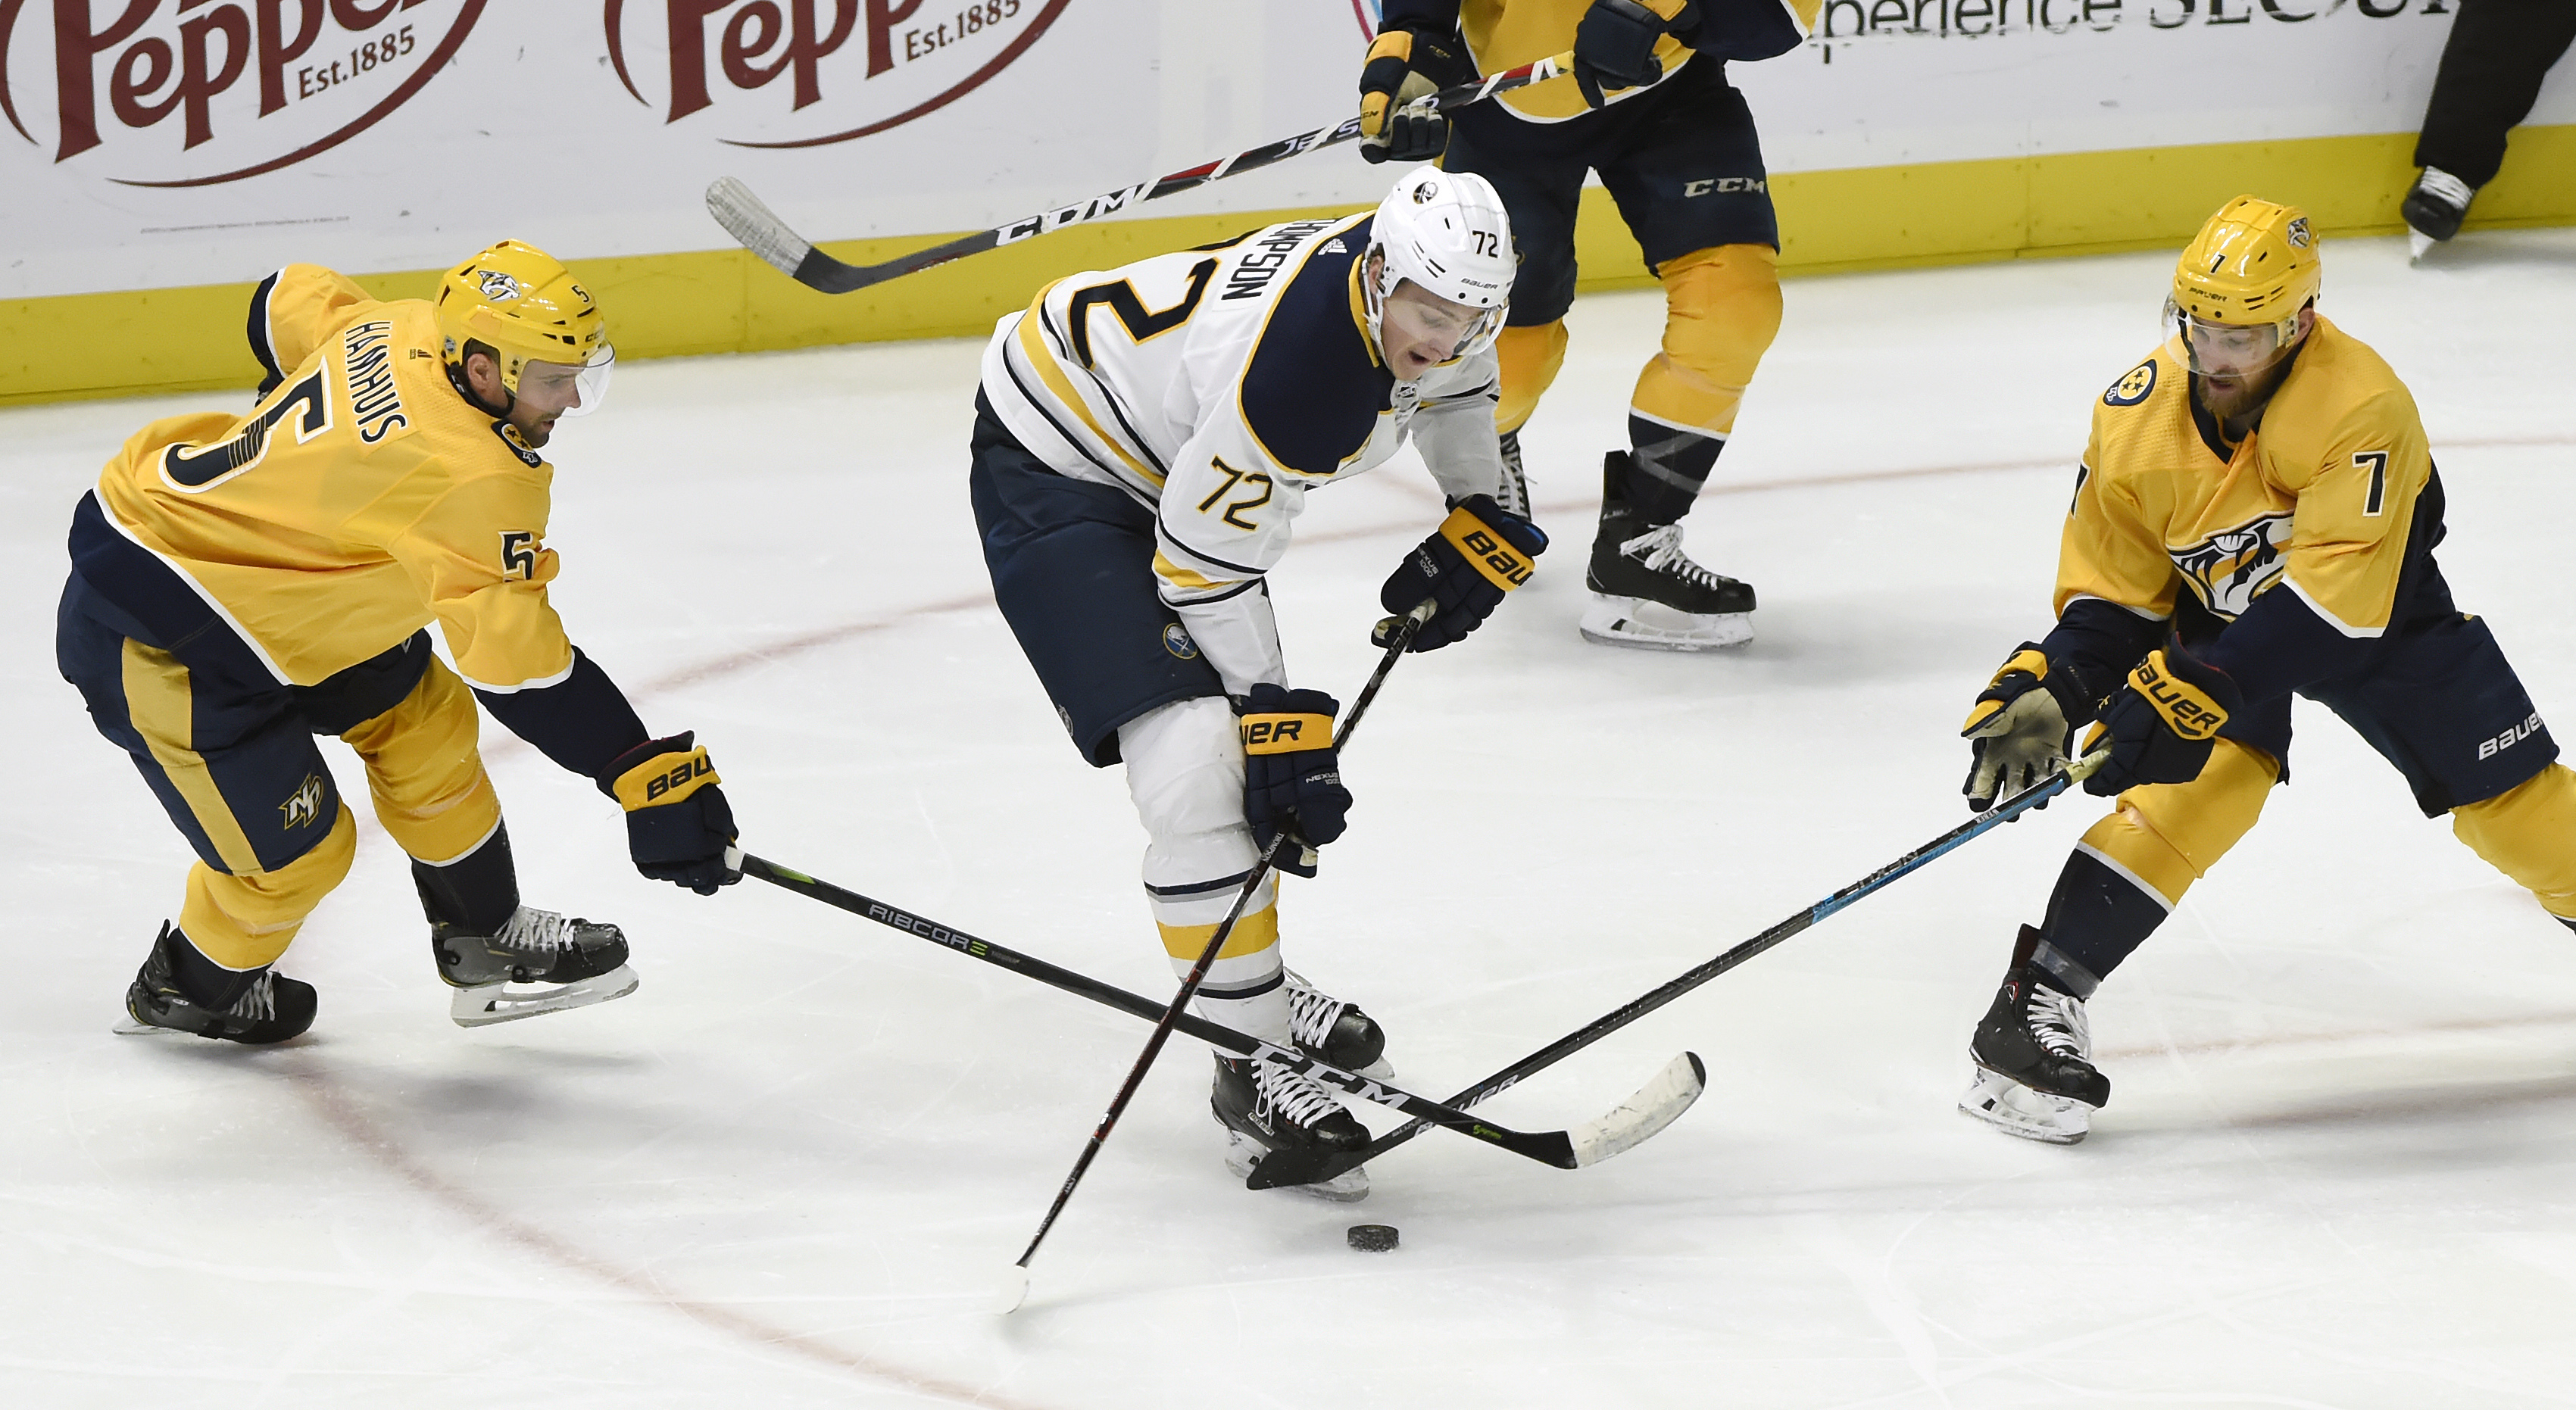 Fiala leads Predators to 2-1 win over Sabres